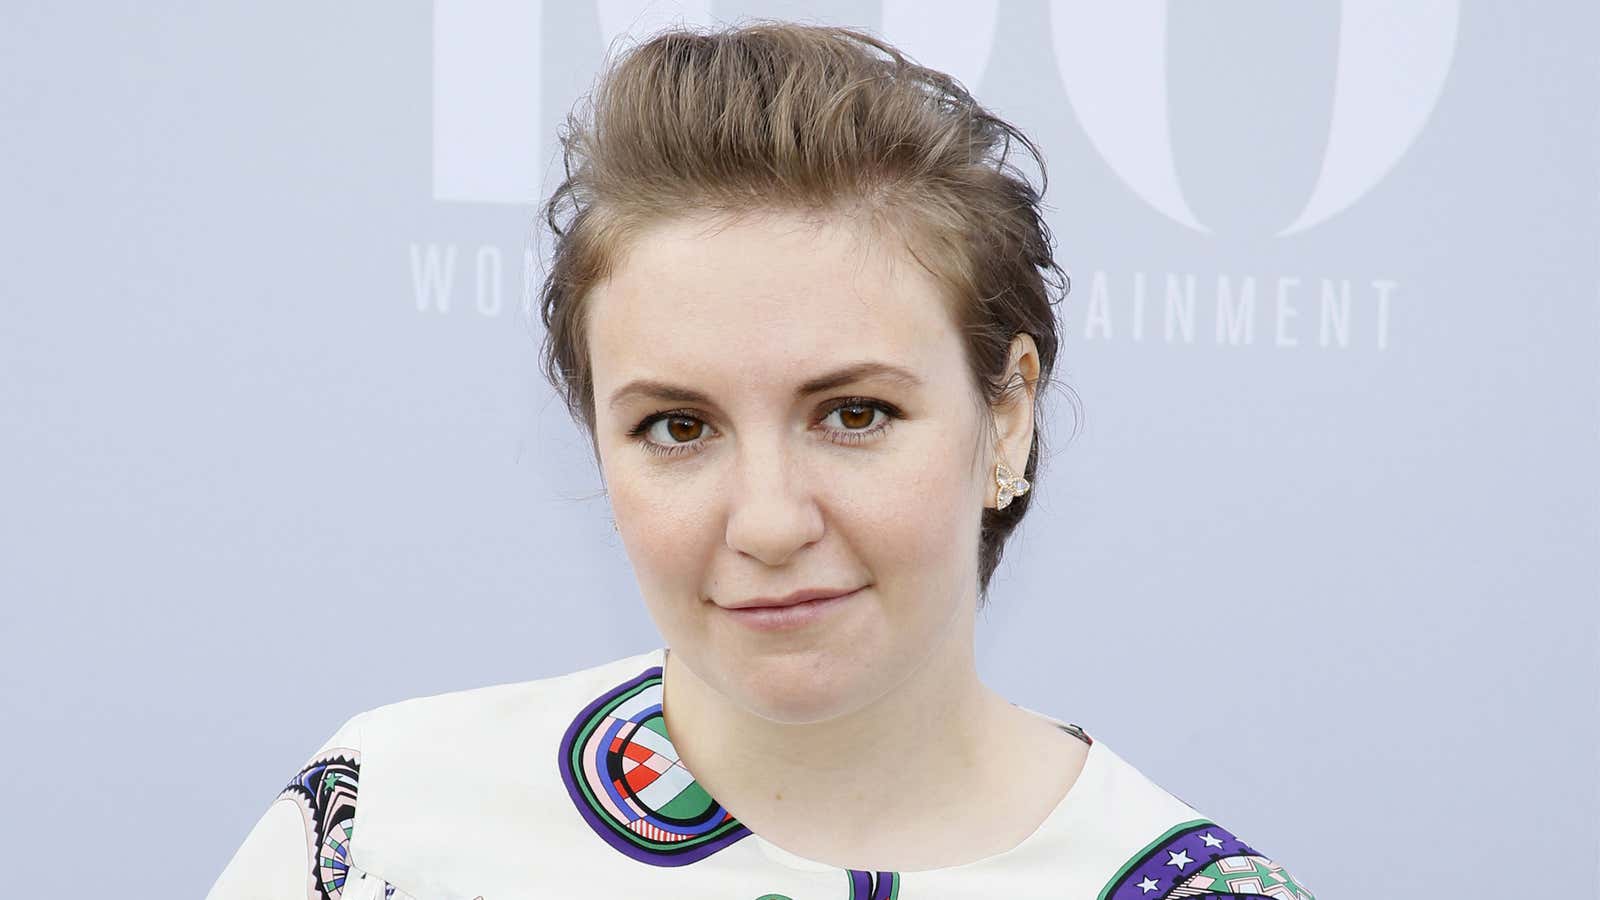 Lena Dunham on her rise, fall, and fame: “My own power is a mystery to me”